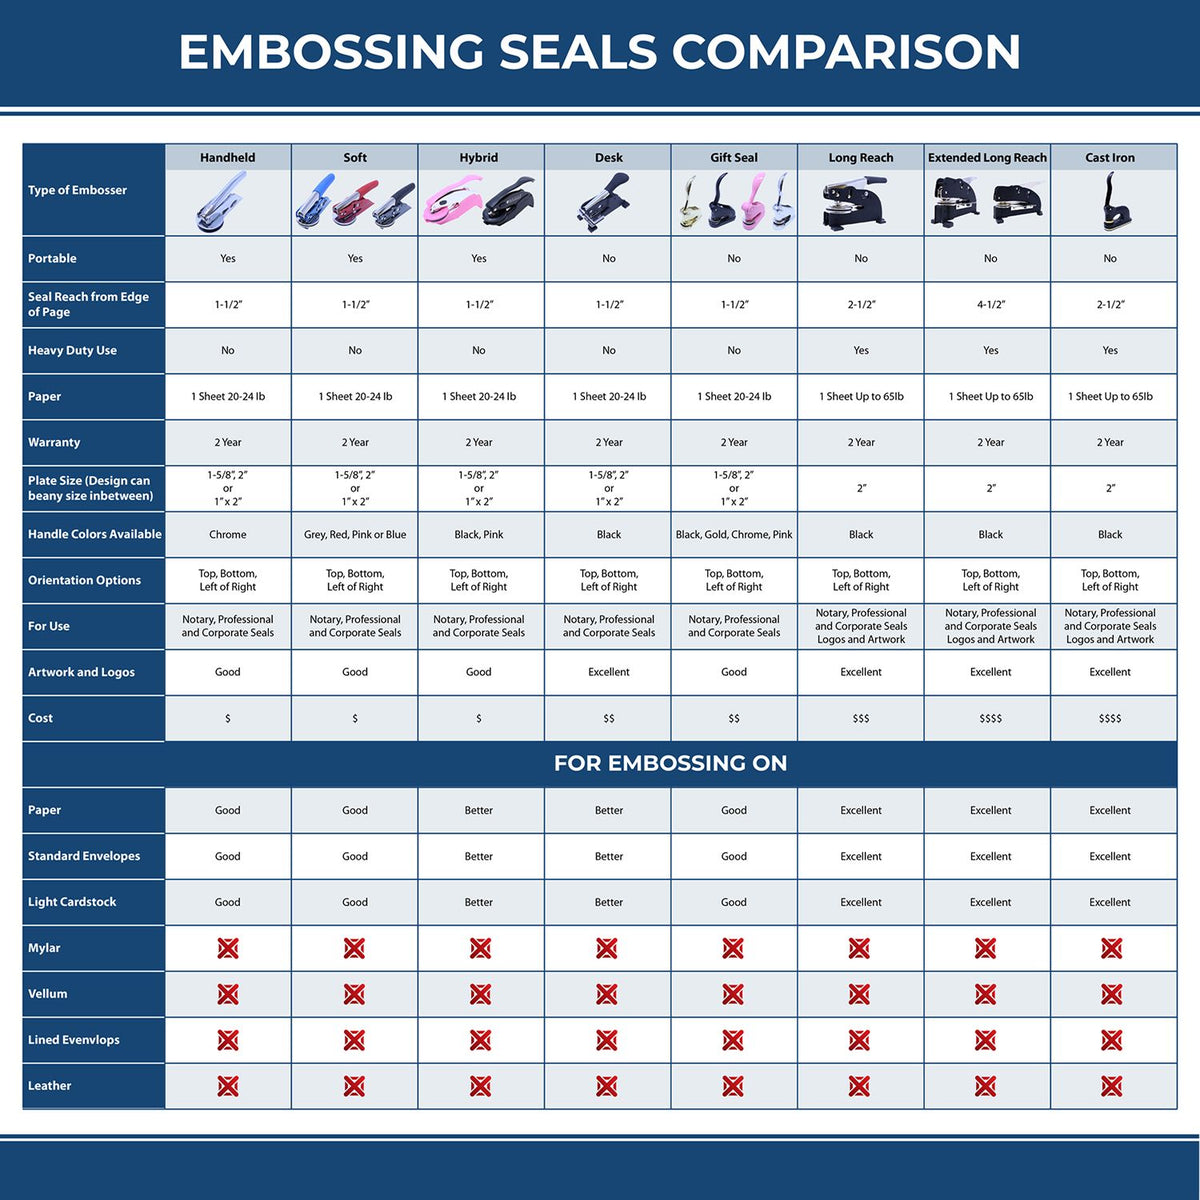 A comparison chart for the different types of mount models available for the Handheld Arkansas Land Surveyor Seal.